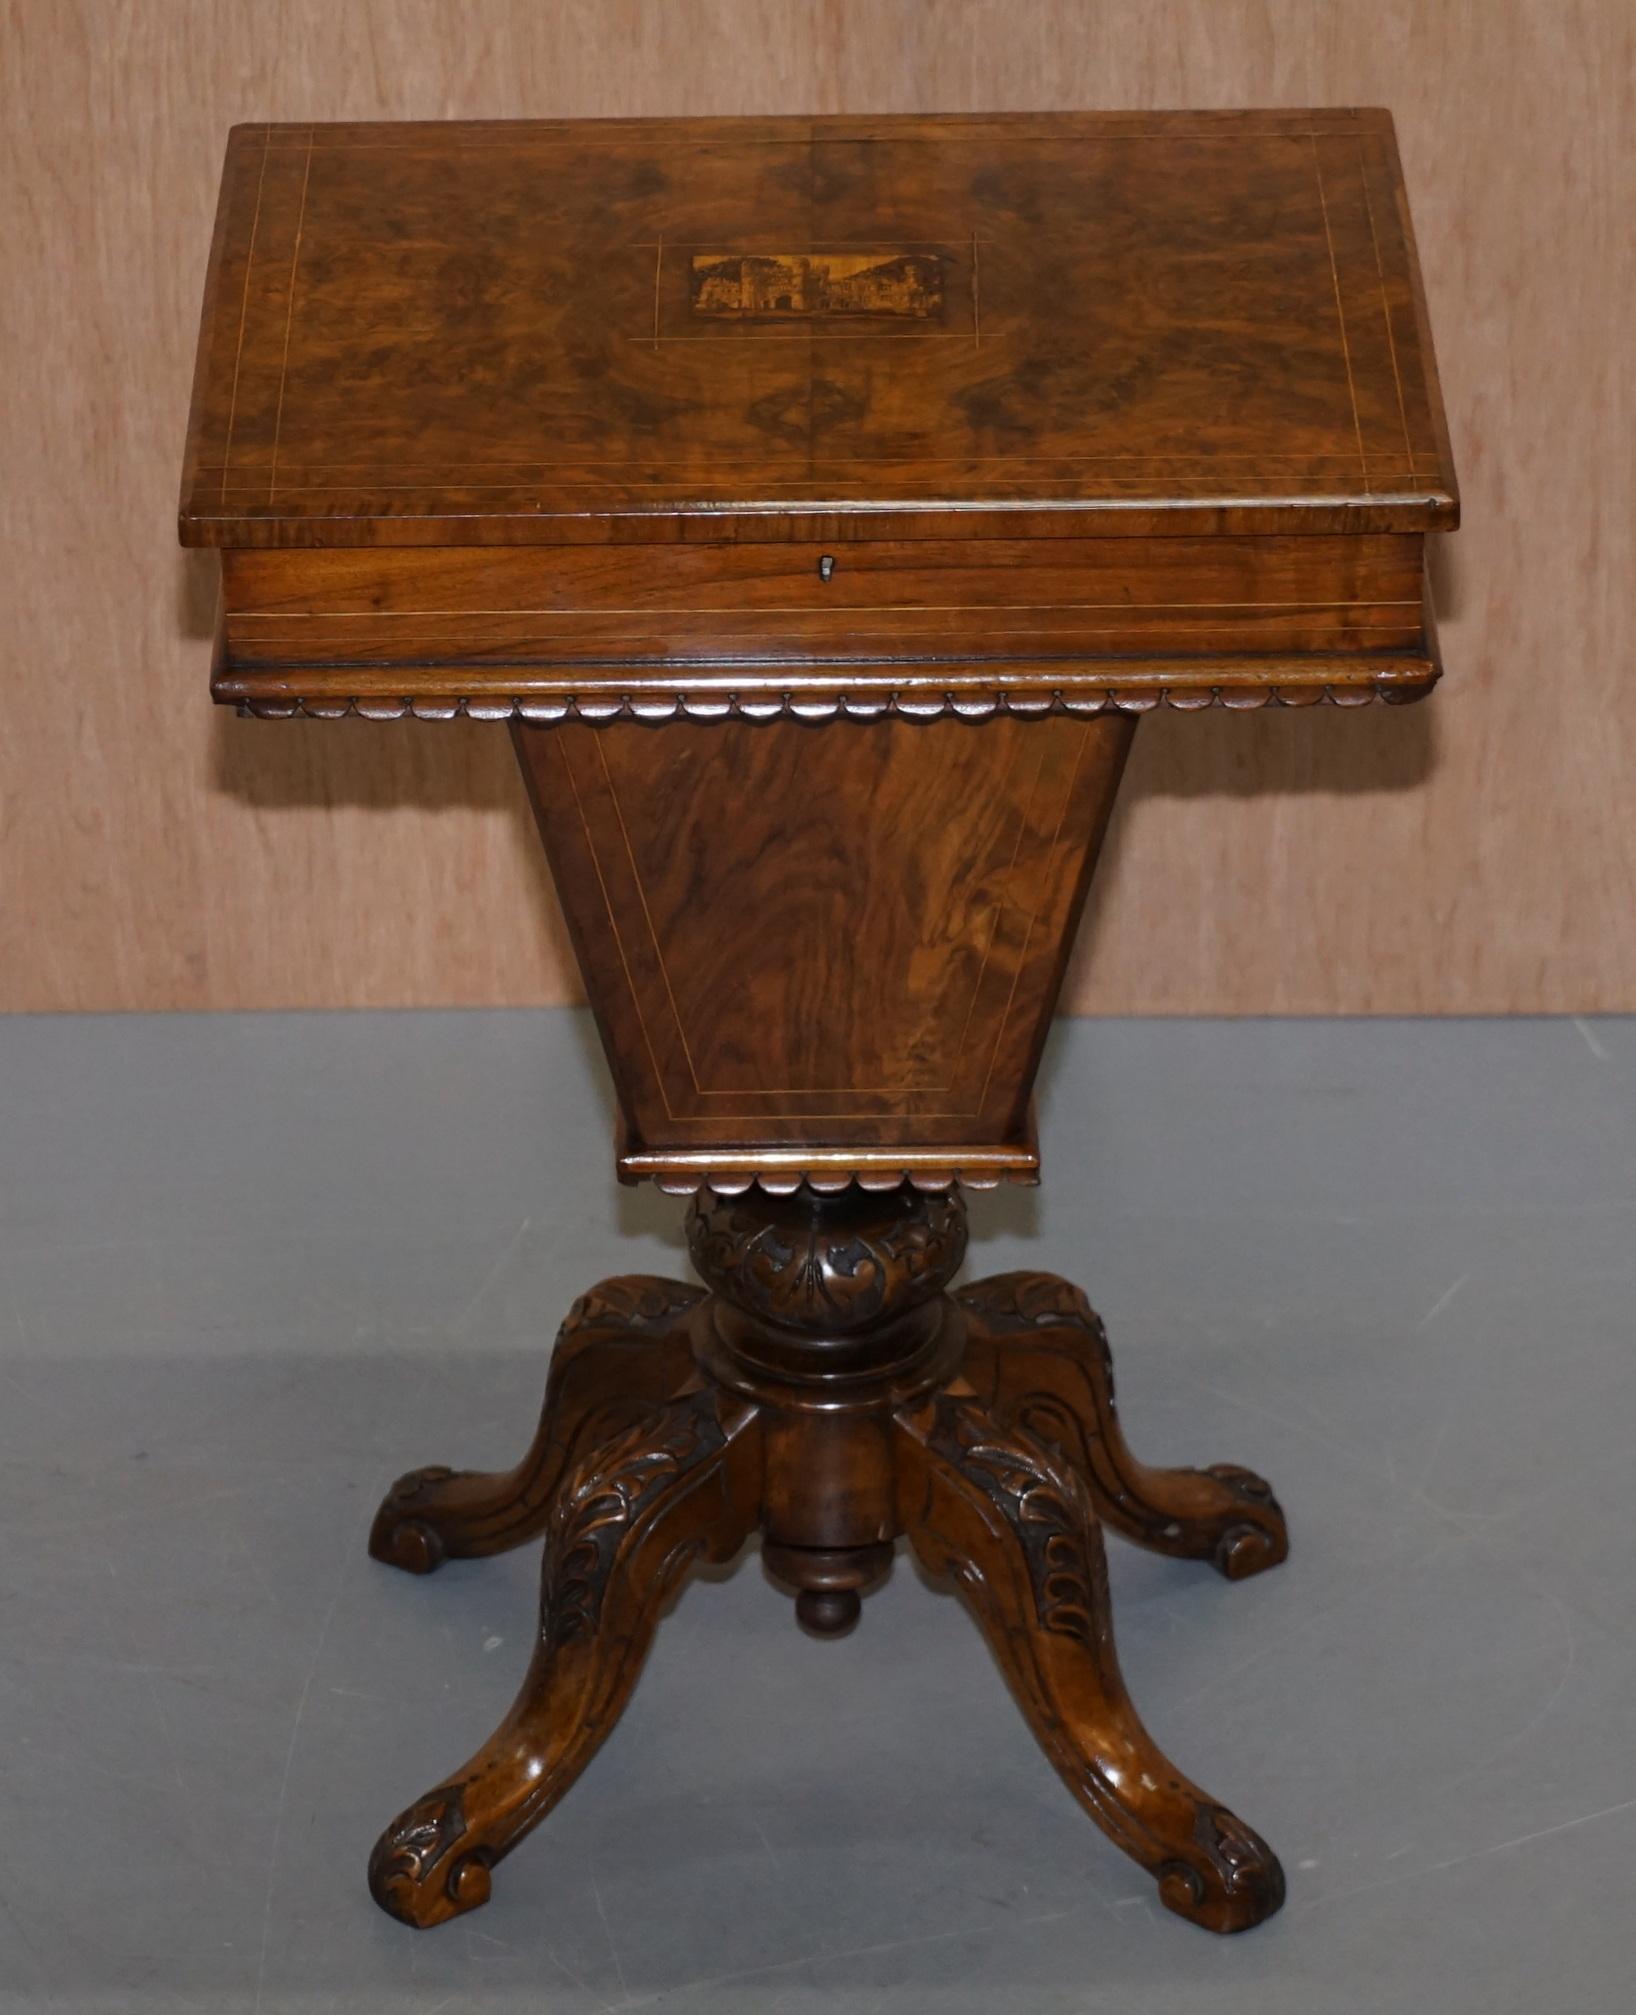 We are delighted to offer for sale this stunning fully restored heavily carved Victorian walnut sewing table with ornately inlaid Tunbridge wear decorated top

A very good looking and decorative piece, I've had it fully restored as its such a good